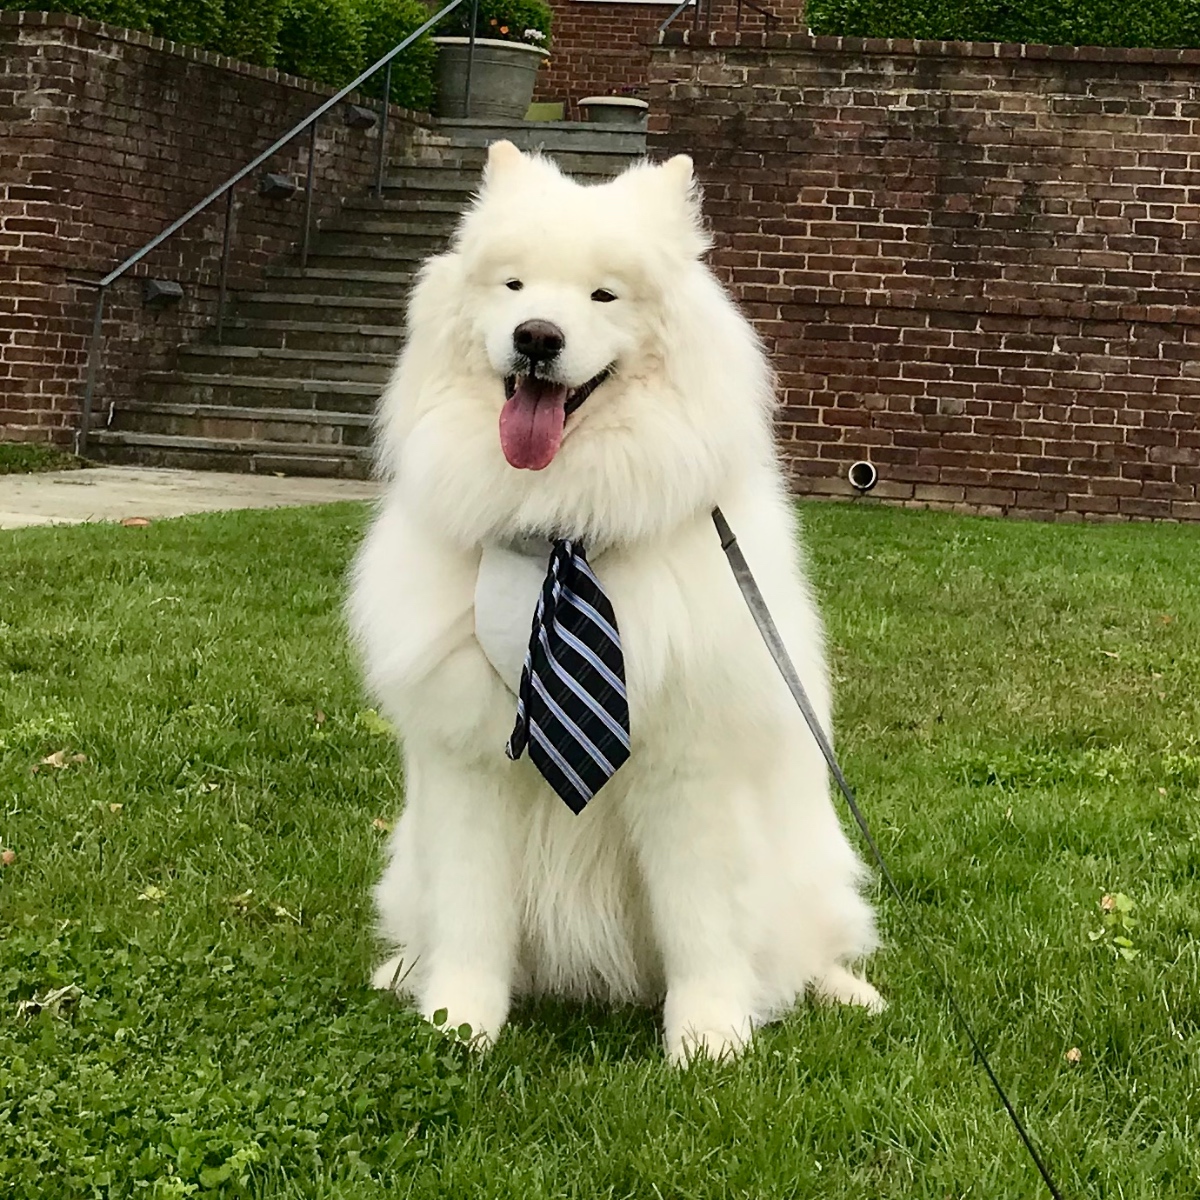 Our Chief Floofy Officer, overseeing the Department of Happiness & Noms, Tyberius Lawver